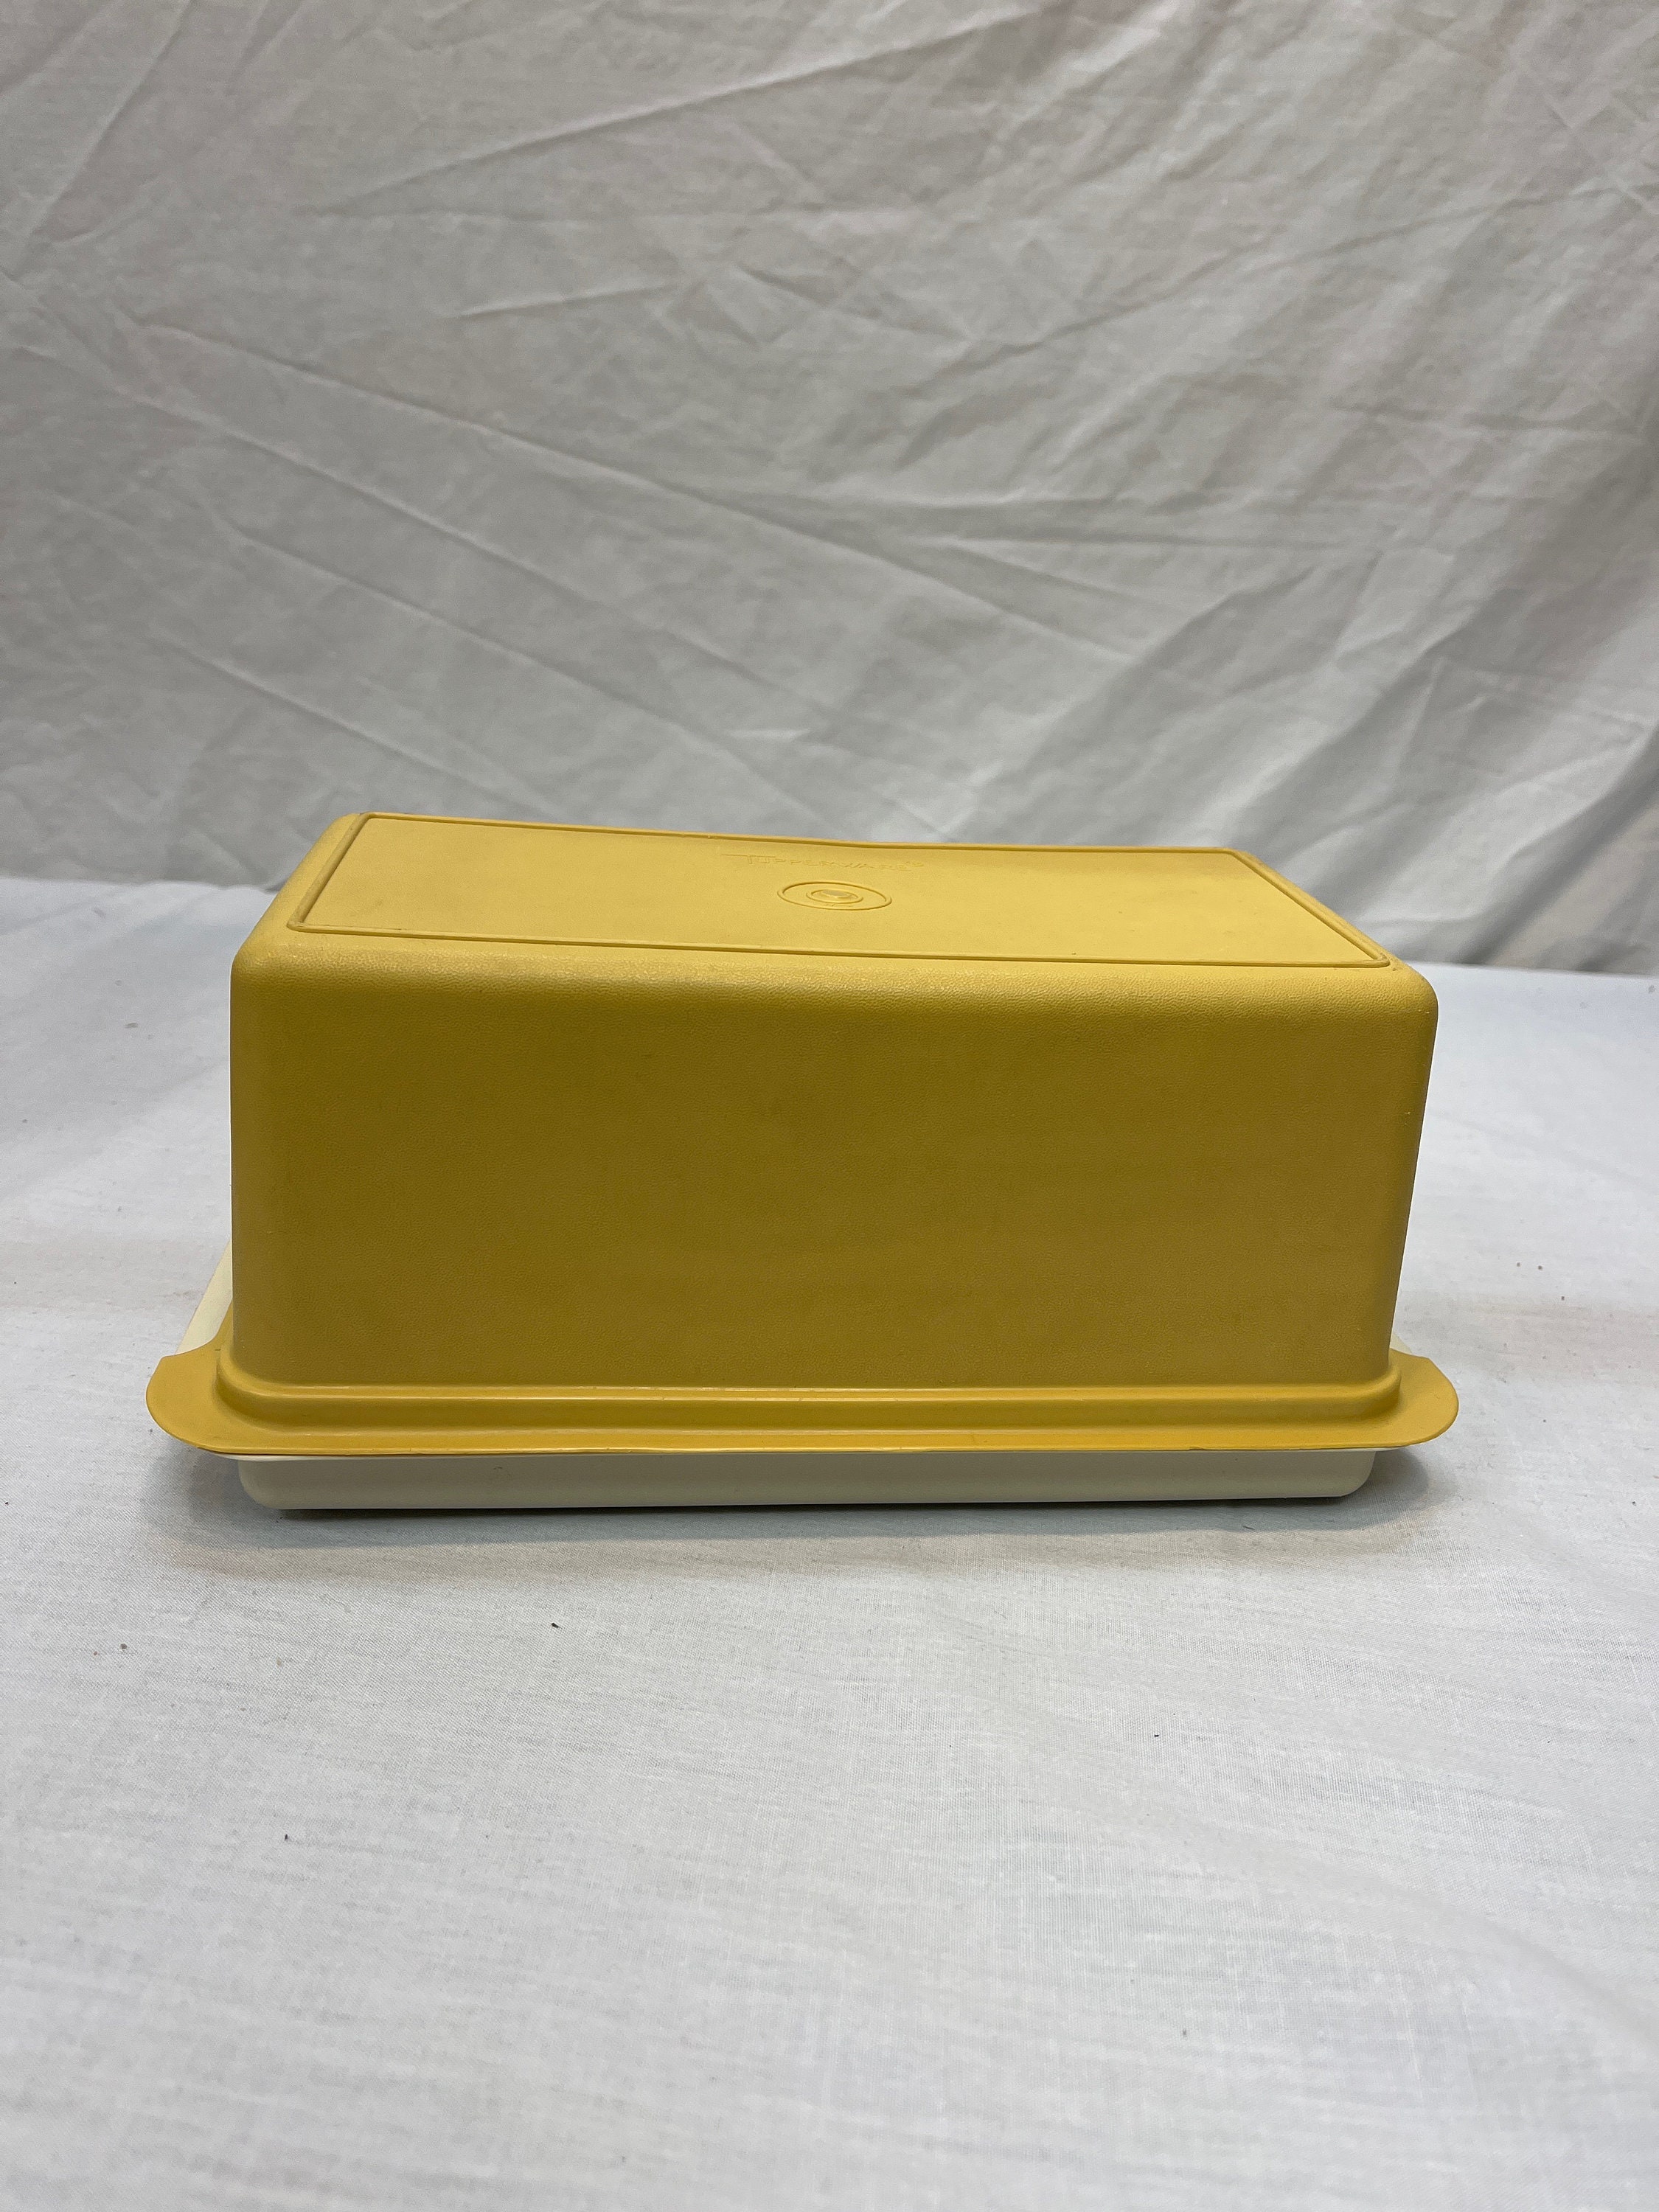 Vintage Early Tupperware Bread Loaf Cracker Keeper Container Opaque USA